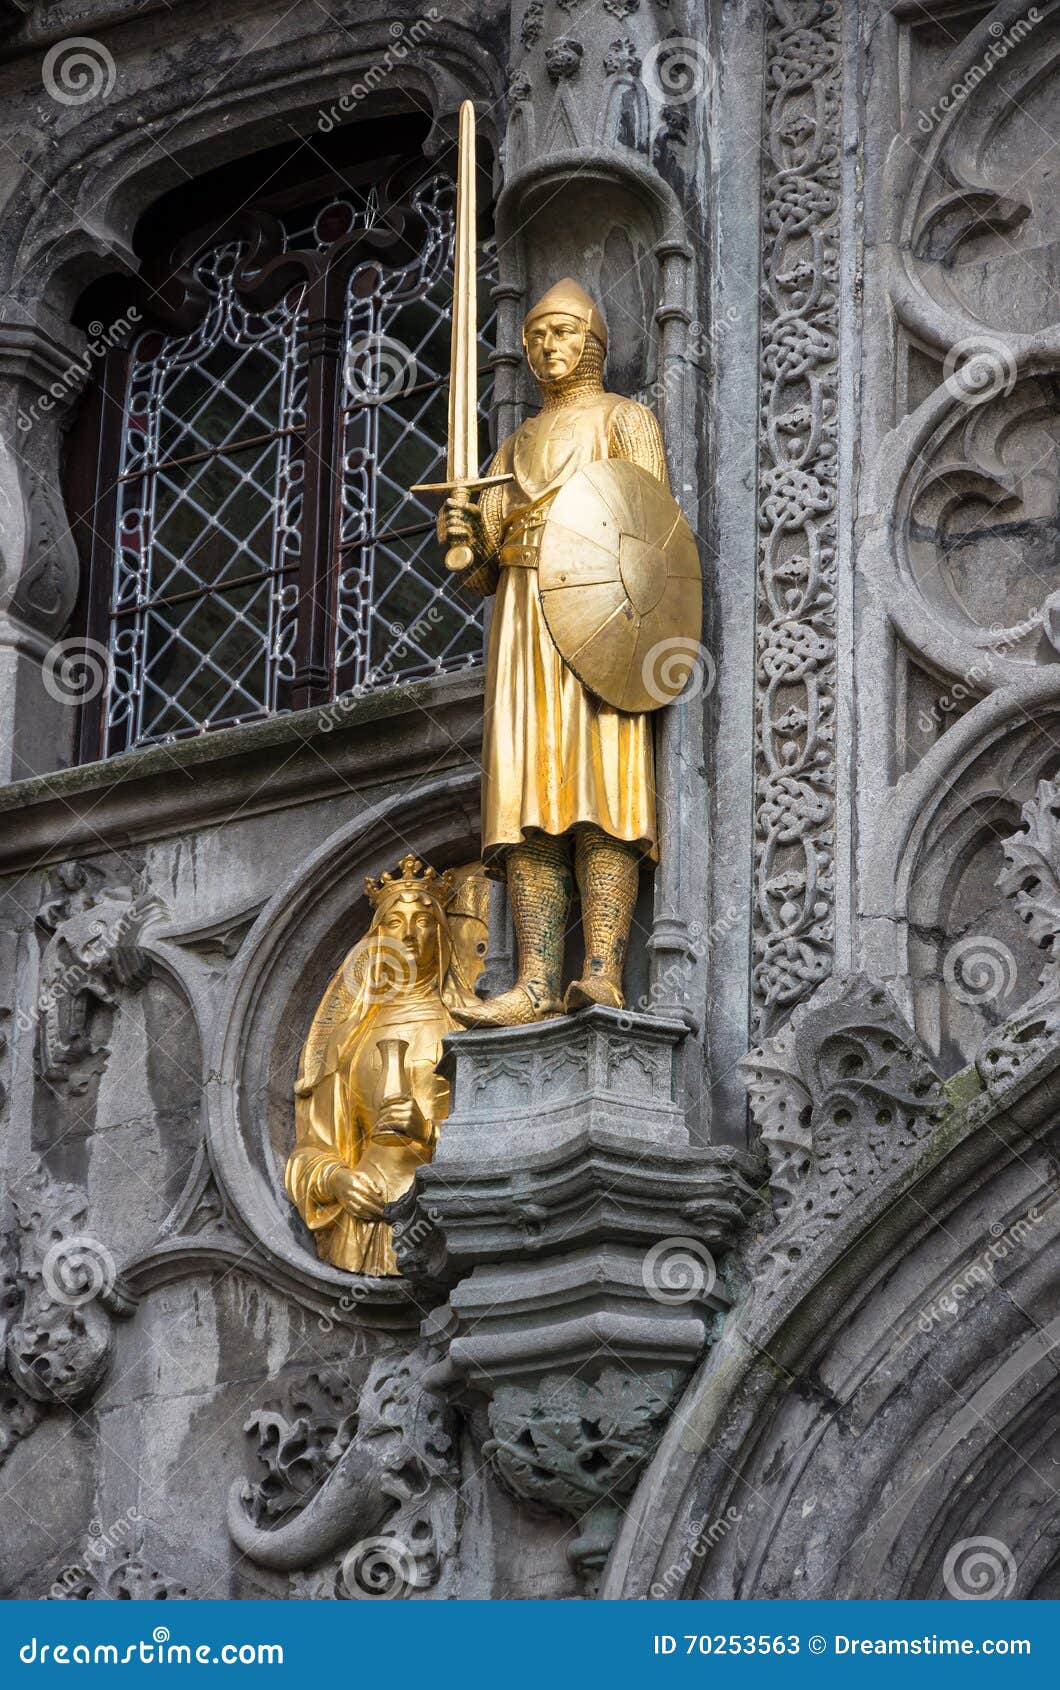 sculptures of crusaders on the walls of basilica of the holy blood. brugge, belgium